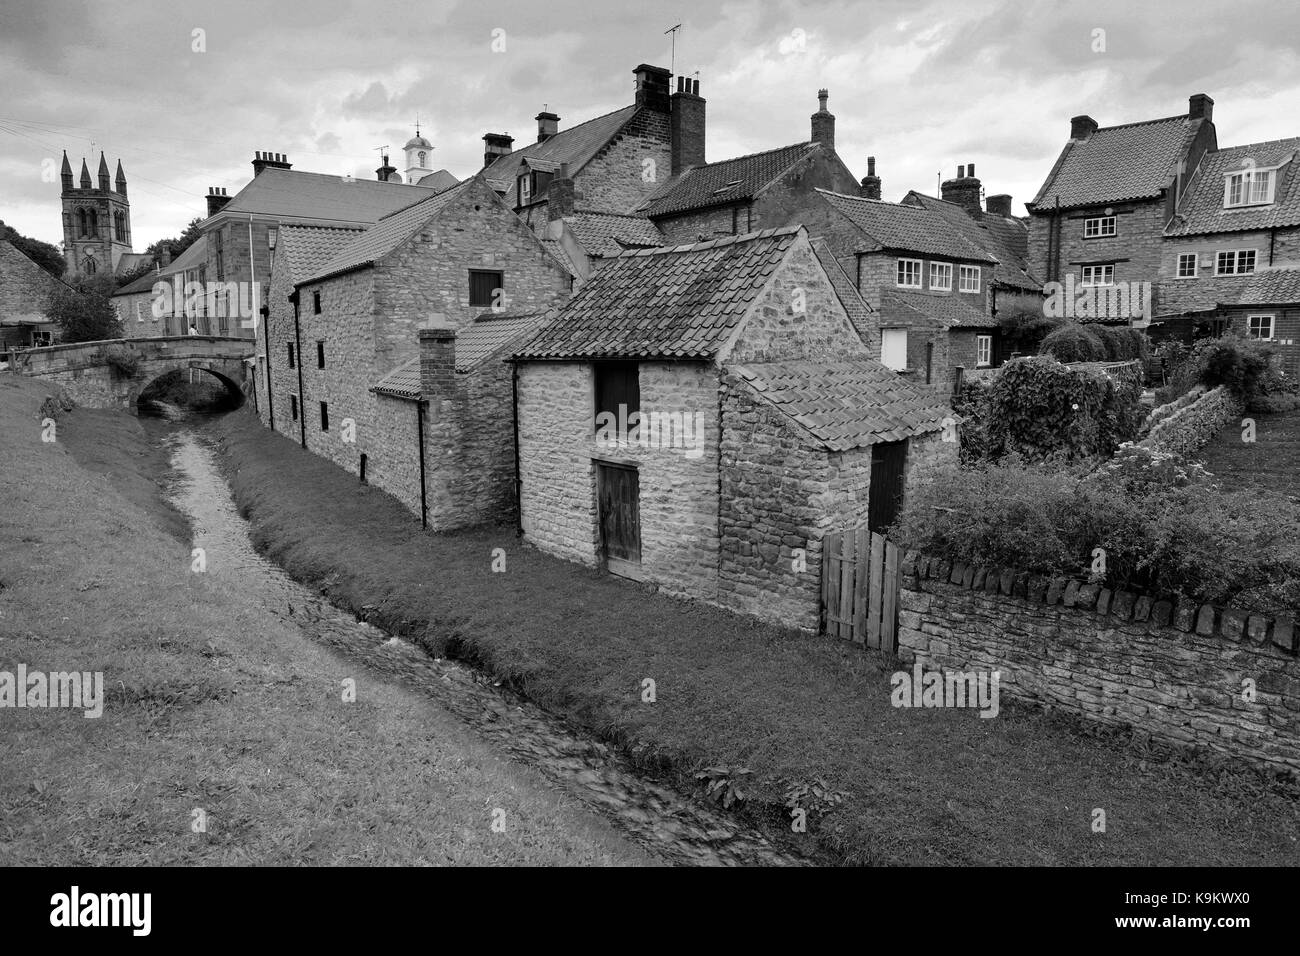 Traditional stone cottages, Helmsley village, North York Moors National Park, North Yorkshire, England, UK Stock Photo